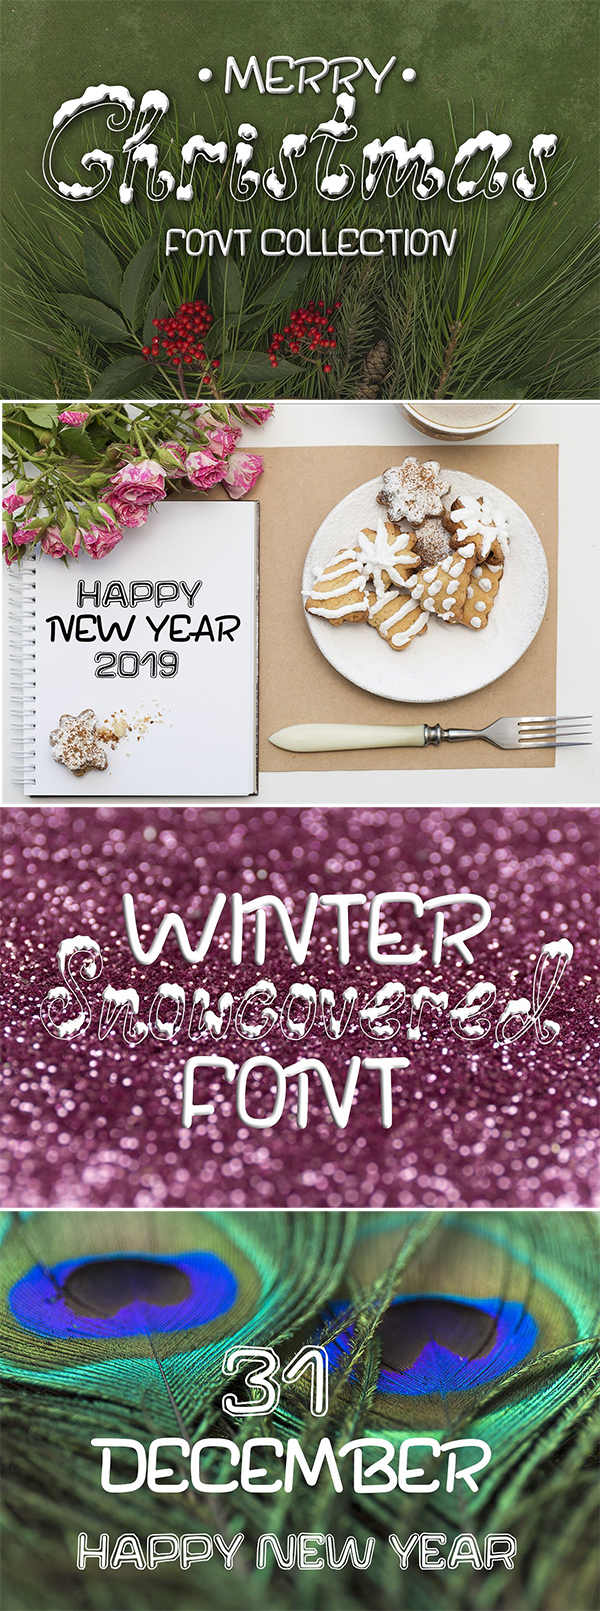 Font for Christmas Cards